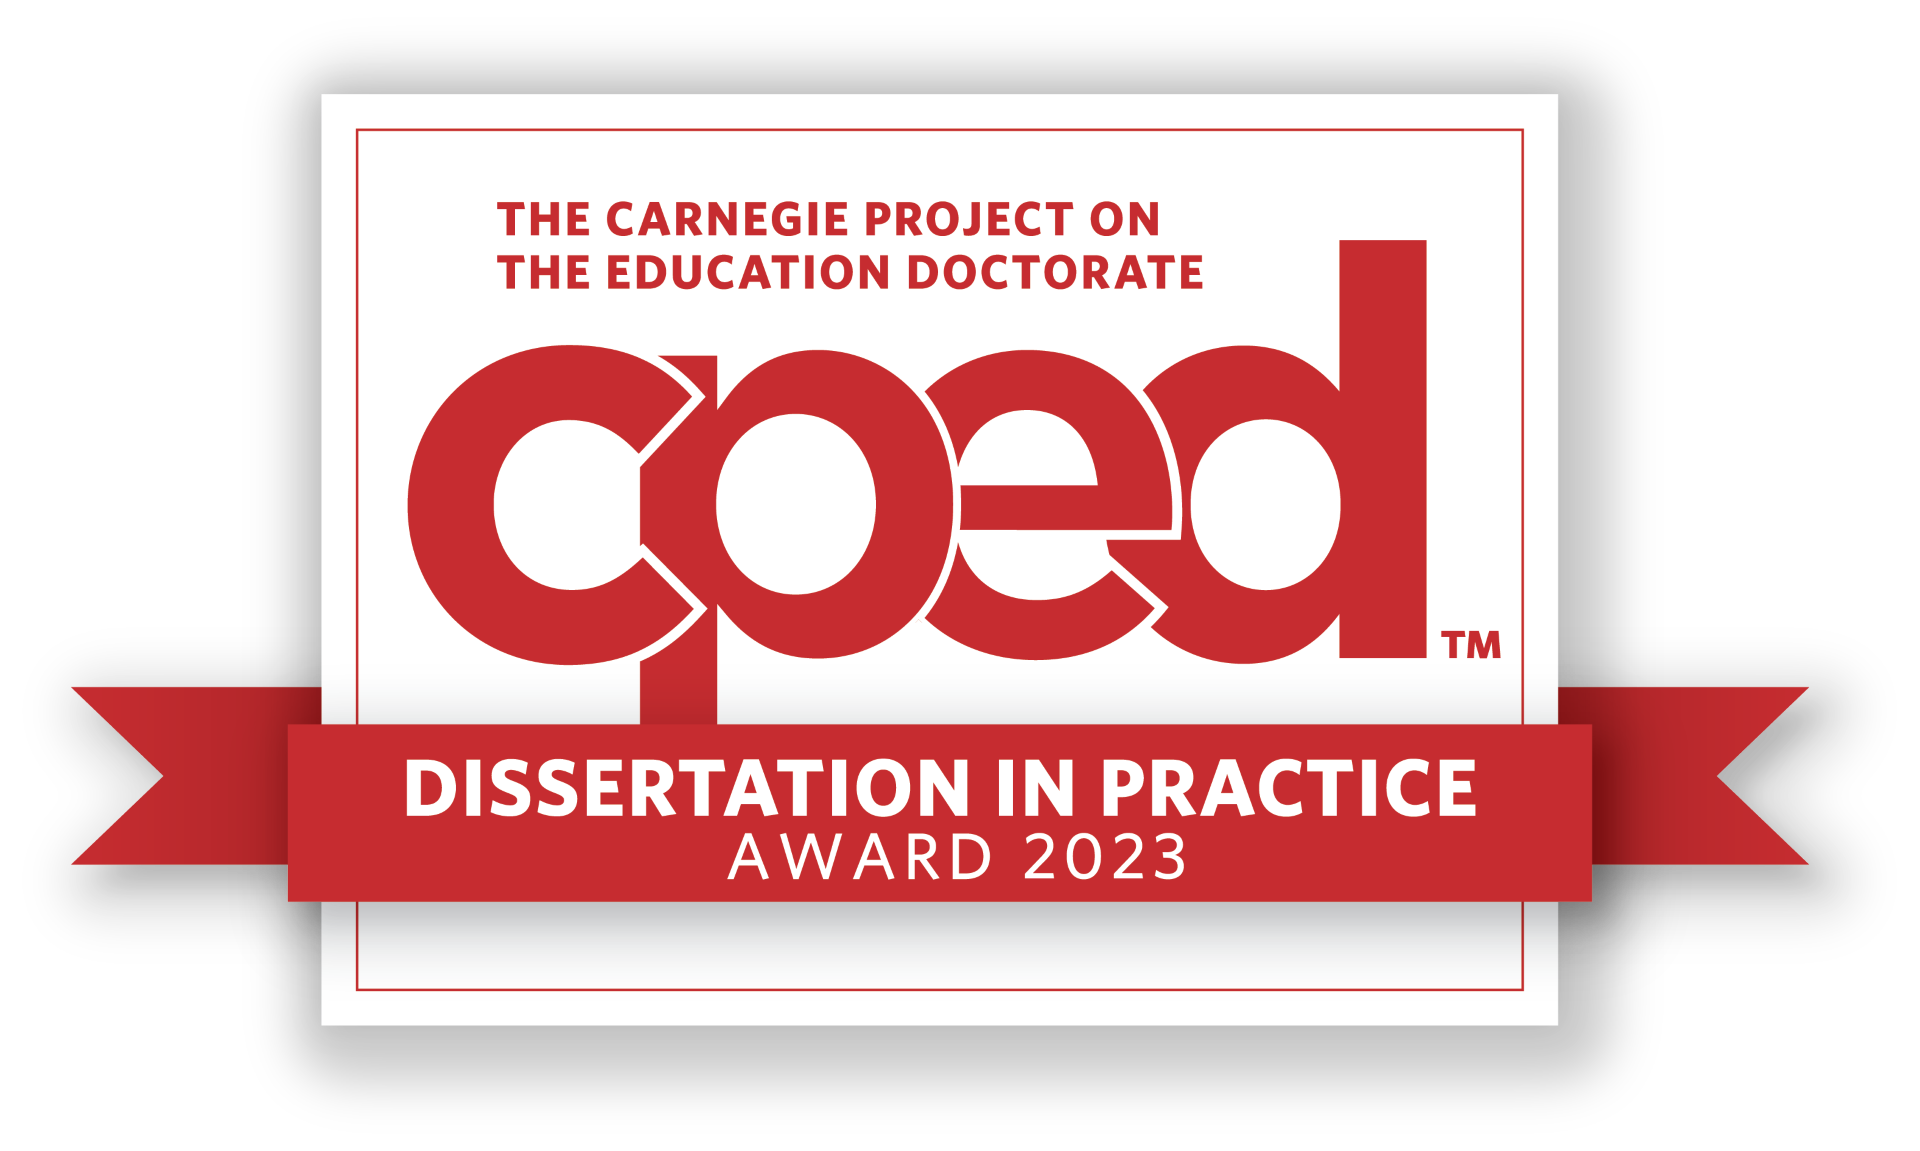 CPED dissertation in practice award 2023